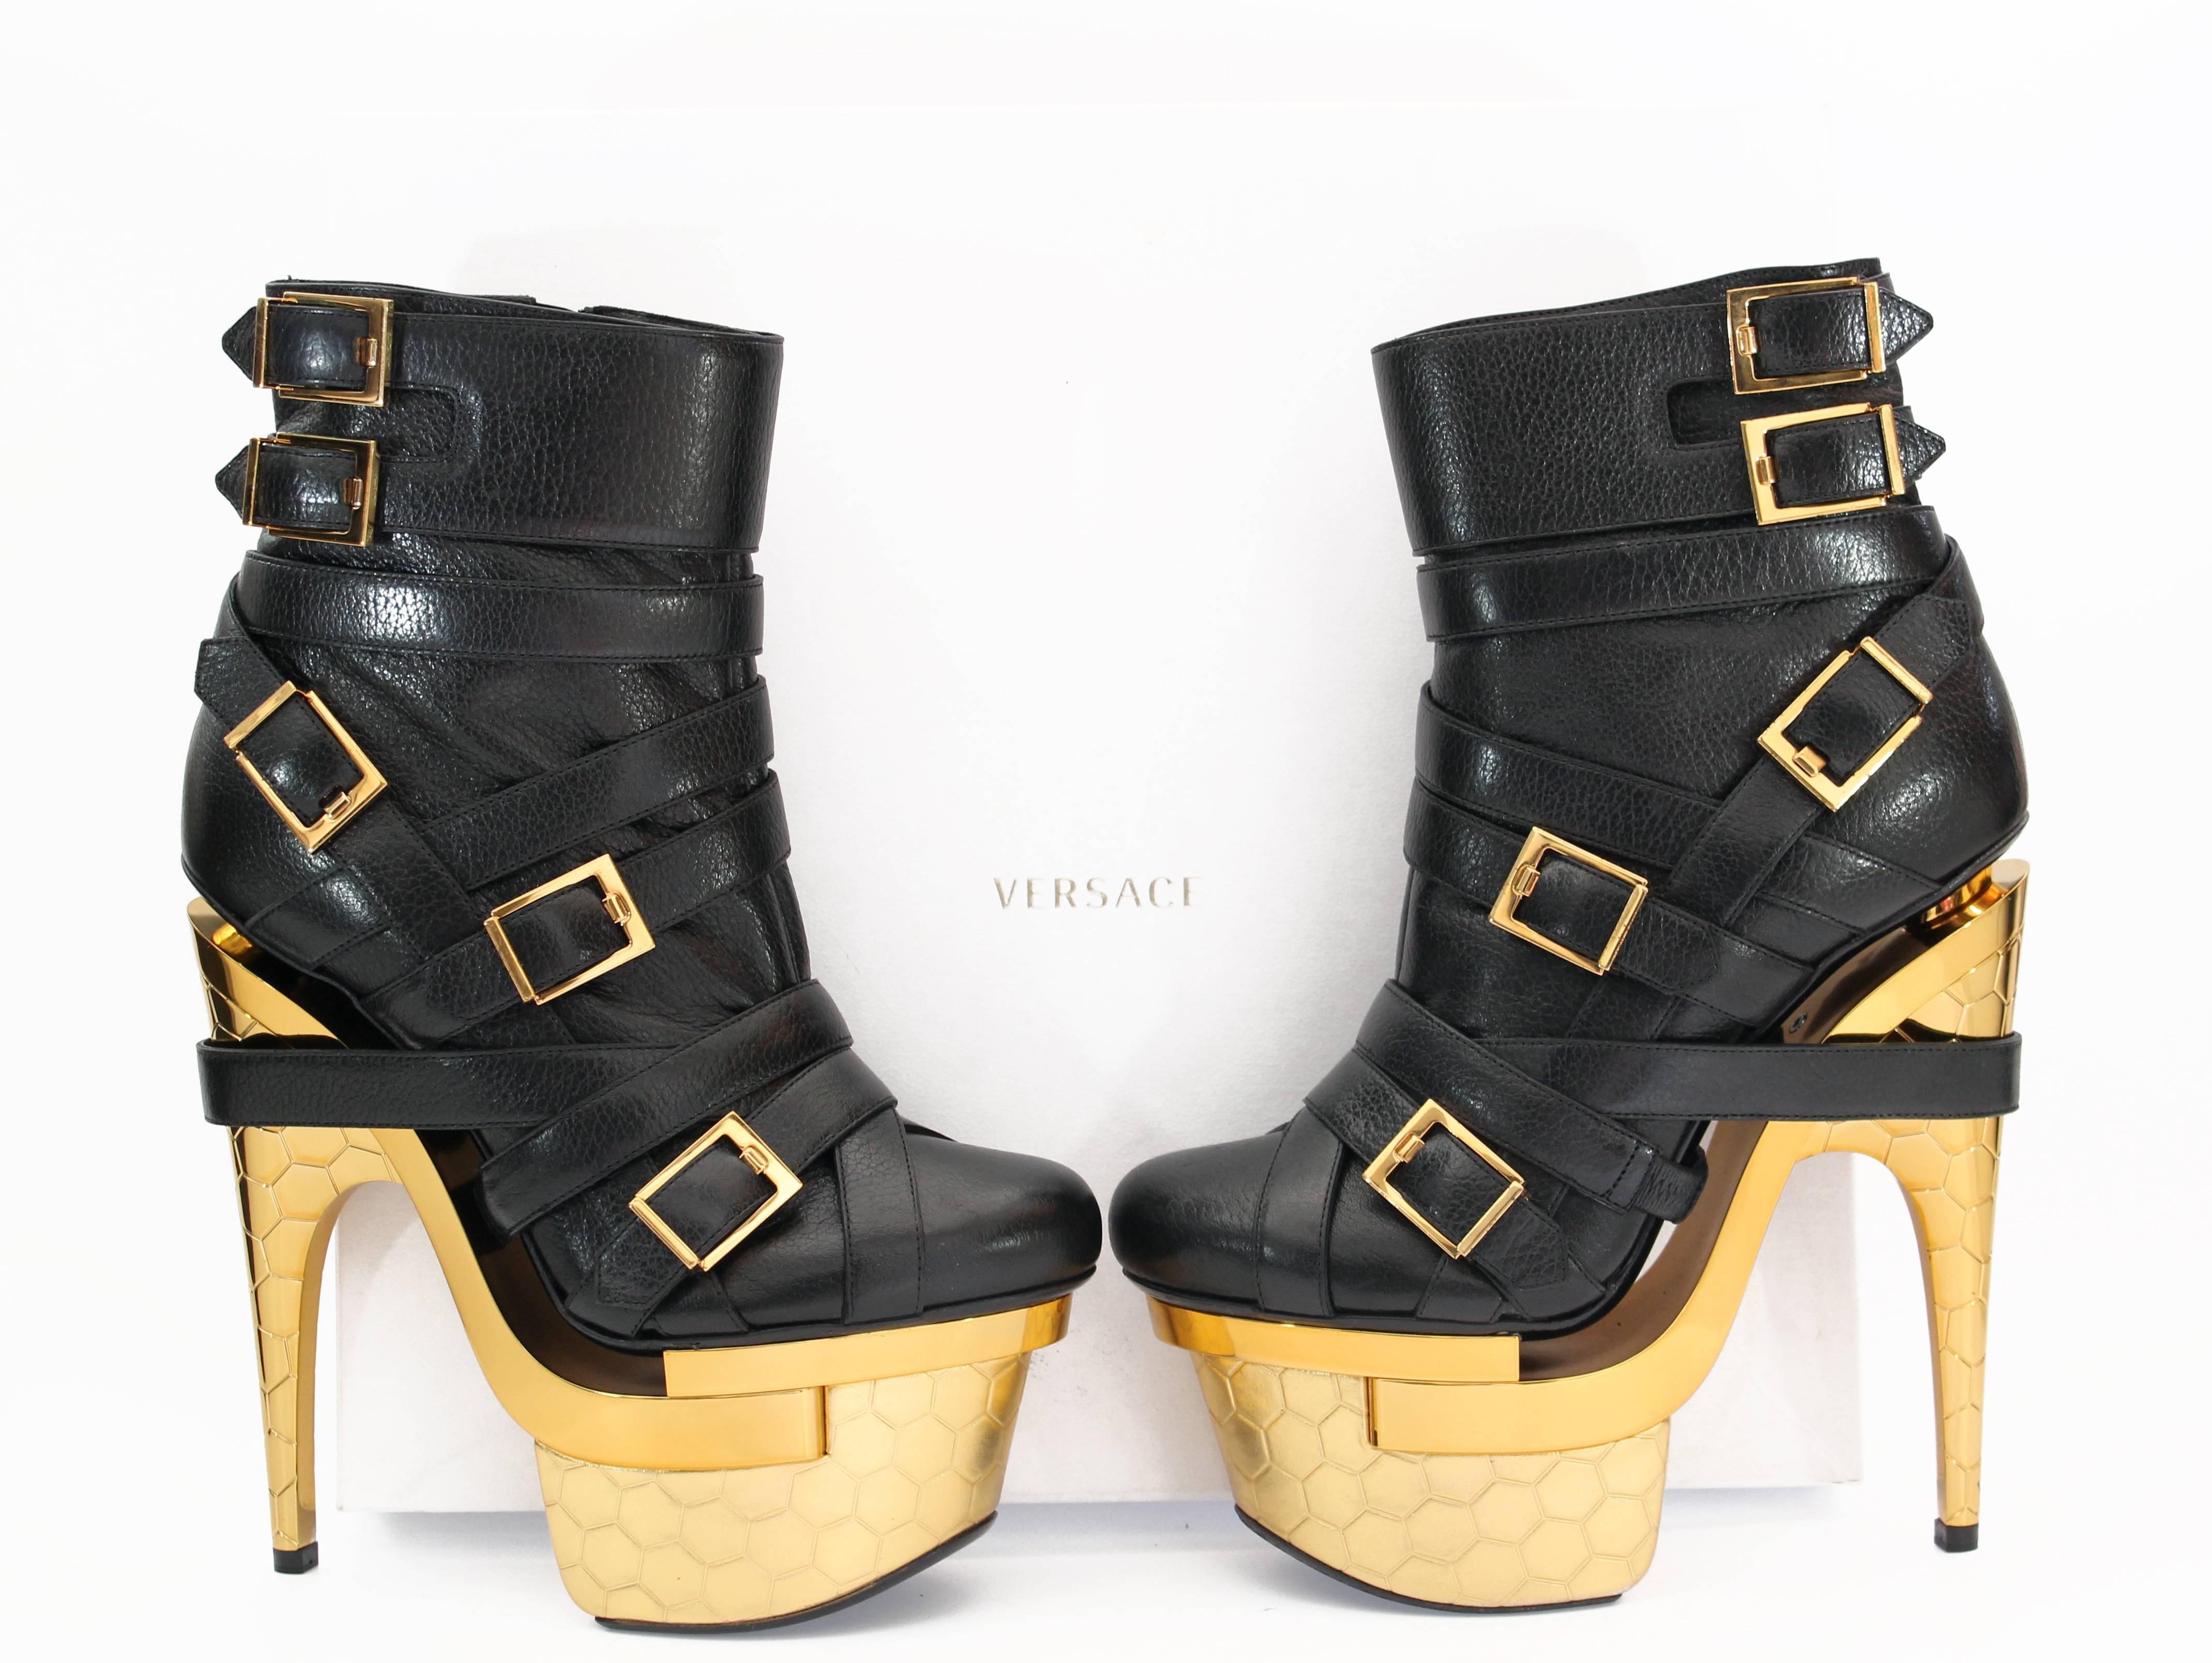 New VERSACE BONDAGE TRIPLE PLATFORM BLACK LEATHER ANKLE BOOTS Sz 36, 37.5 In New Condition For Sale In Montgomery, TX